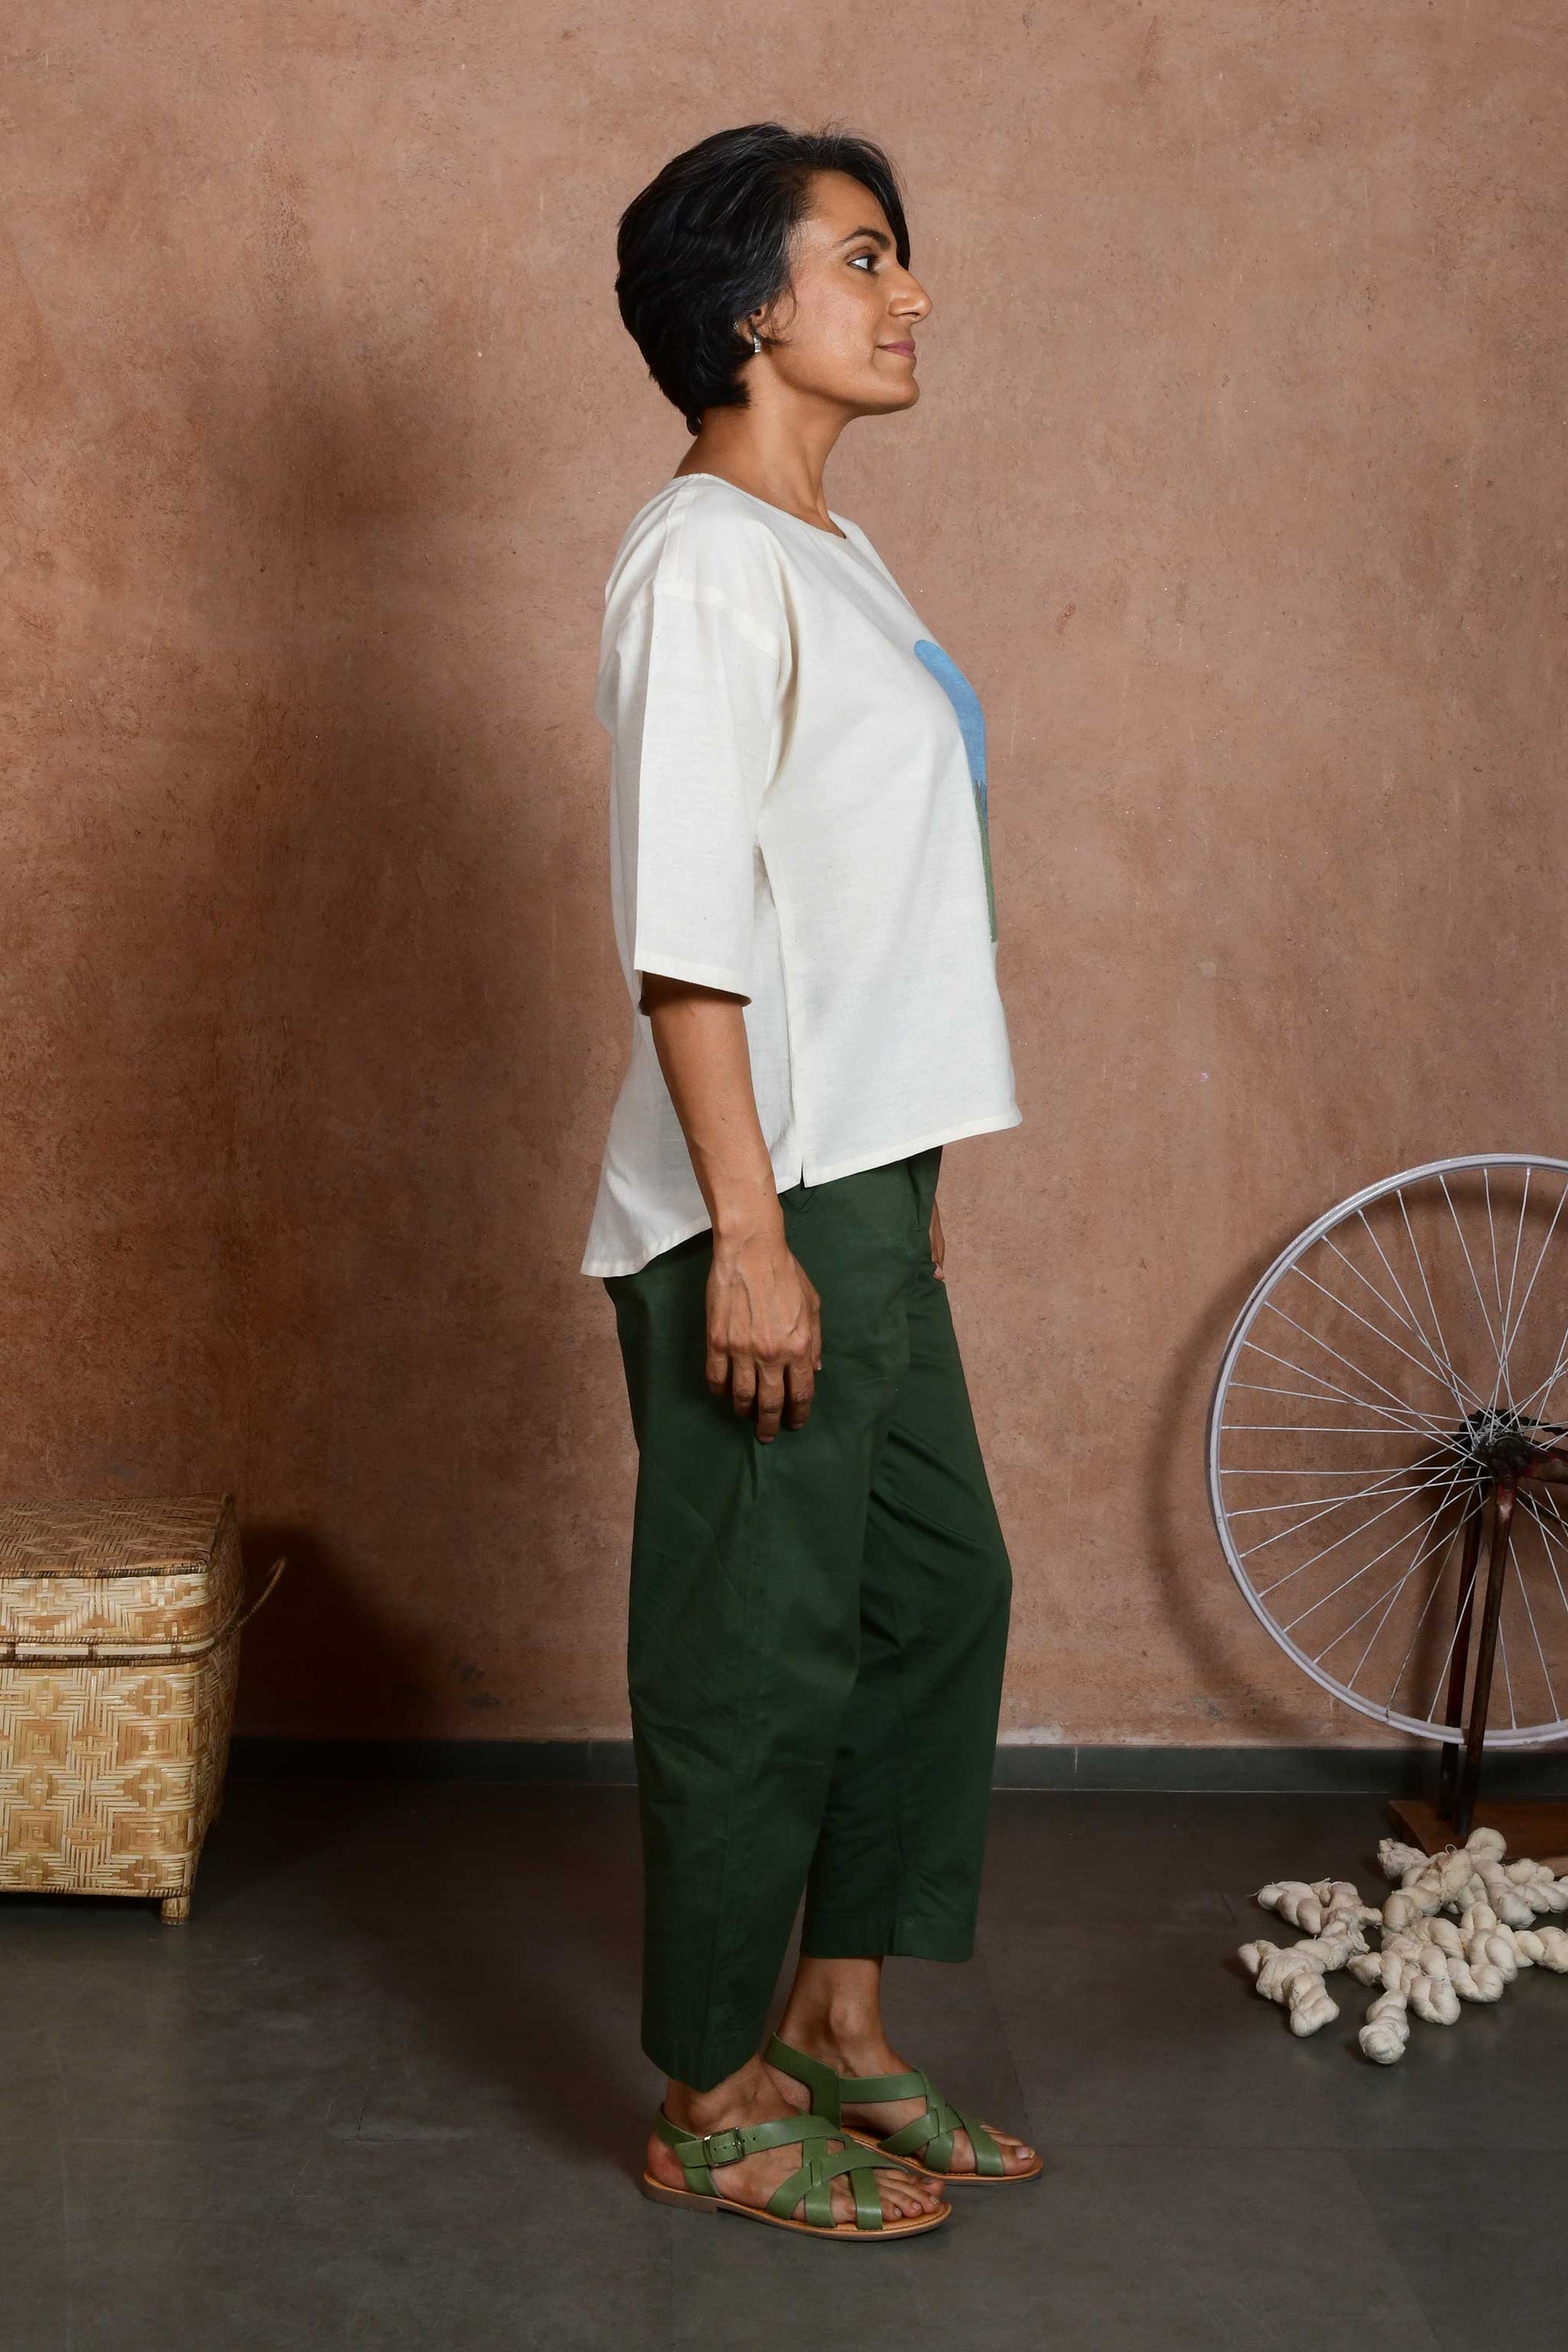 Side pose a middle aged women wearing an off white oversized crop top blouse with an applique patch depicting a sunrise and green mountains paired with green capri pants.